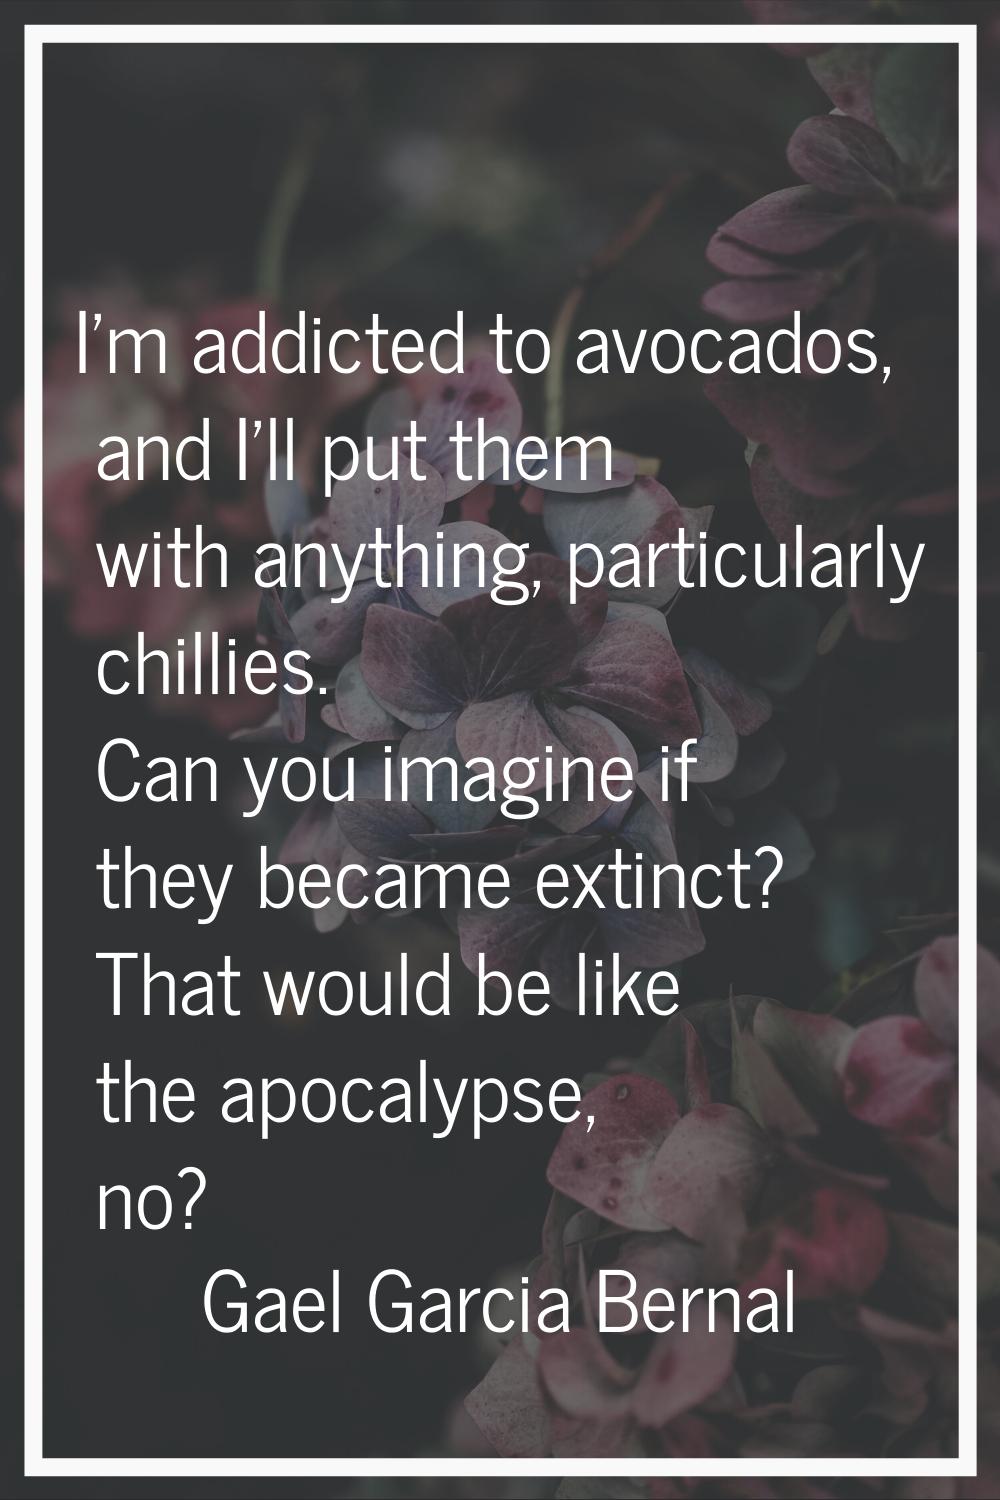 I'm addicted to avocados, and I'll put them with anything, particularly chillies. Can you imagine i